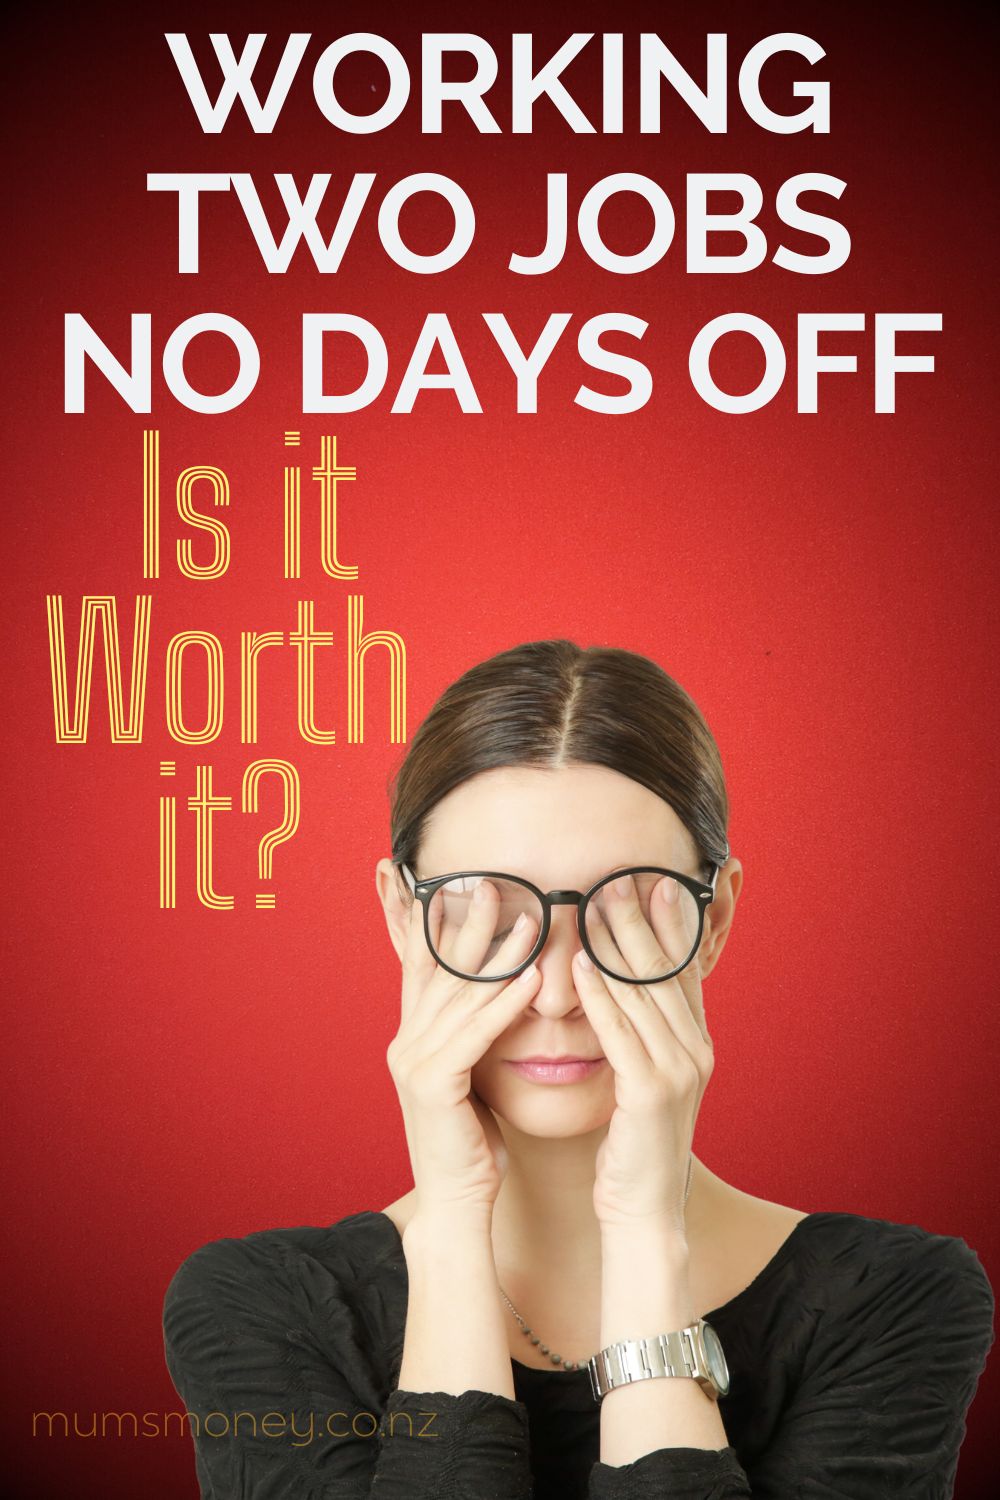 Working Two Jobs No Days Off - Is it Worth it Pin Image